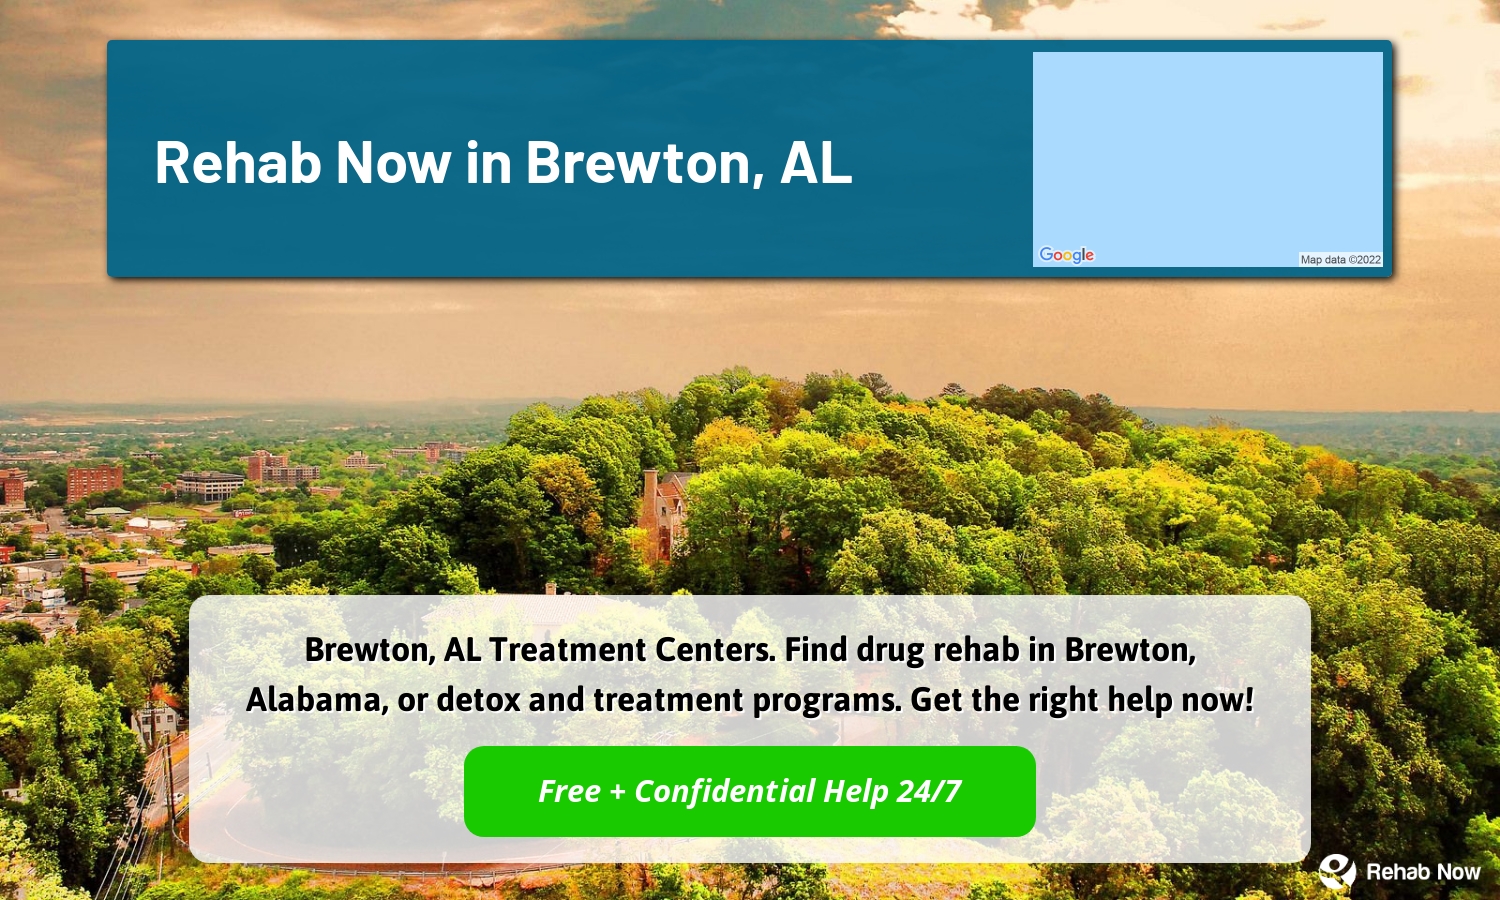 Brewton, AL Treatment Centers. Find drug rehab in Brewton, Alabama, or detox and treatment programs. Get the right help now!